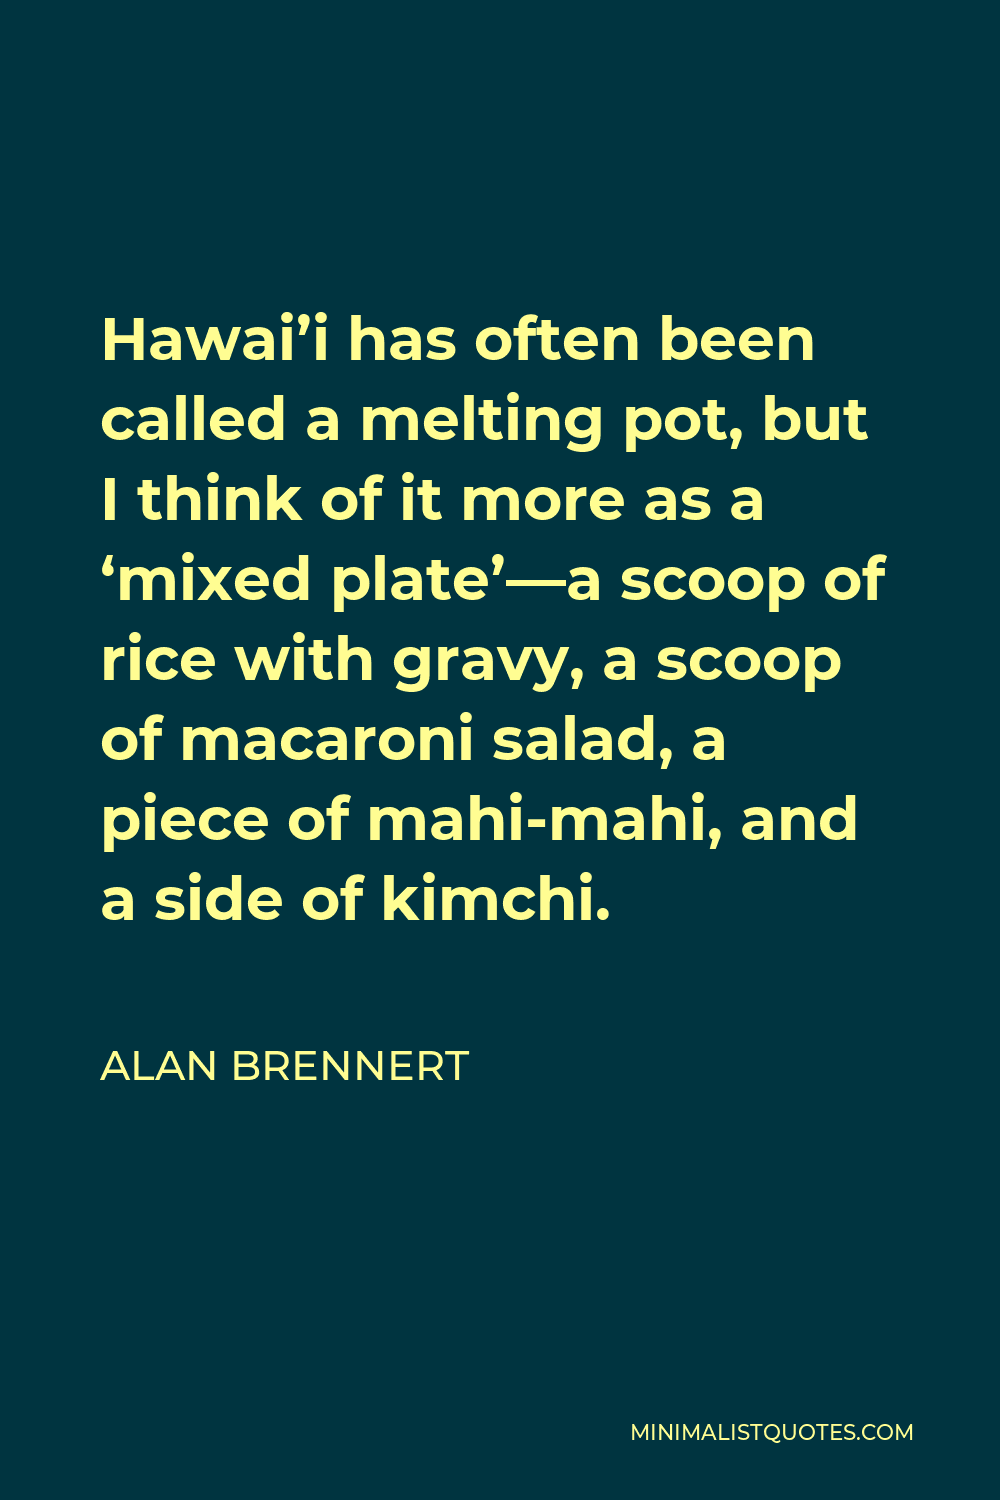 Alan Brennert Quote - Hawai’i has often been called a melting pot, but I think of it more as a ‘mixed plate’—a scoop of rice with gravy, a scoop of macaroni salad, a piece of mahi-mahi, and a side of kimchi.